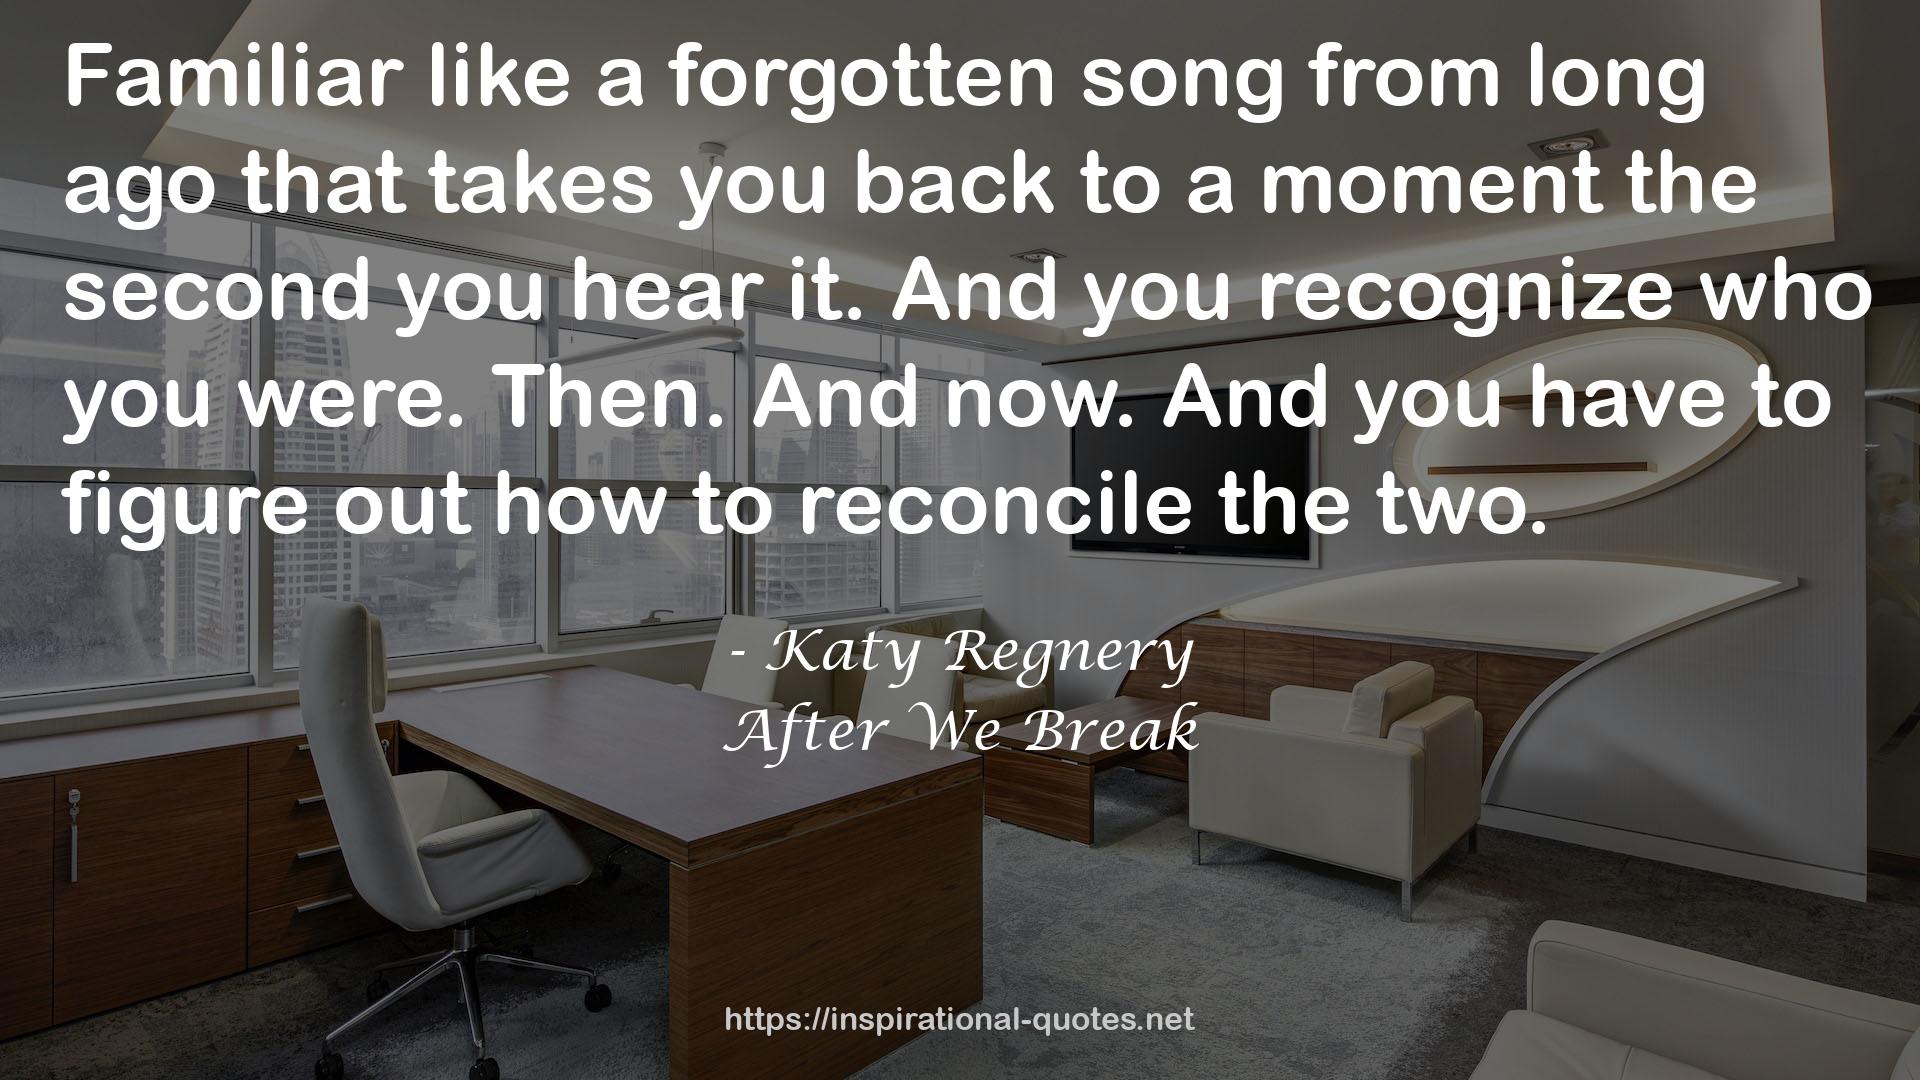 Katy Regnery QUOTES